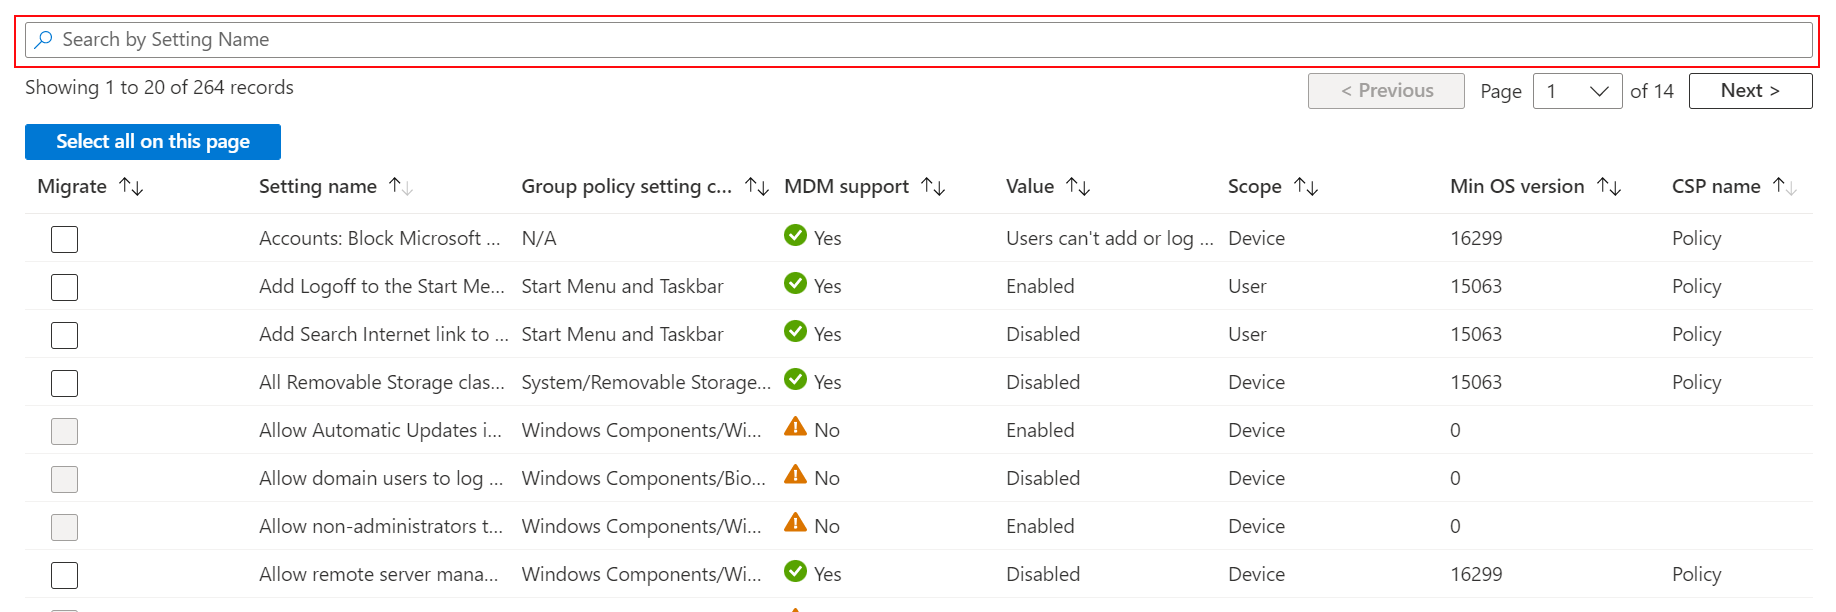 Screenshot that shows how to search for the setting name in the Group Policy Analytics migrate feature in Microsoft Intune.